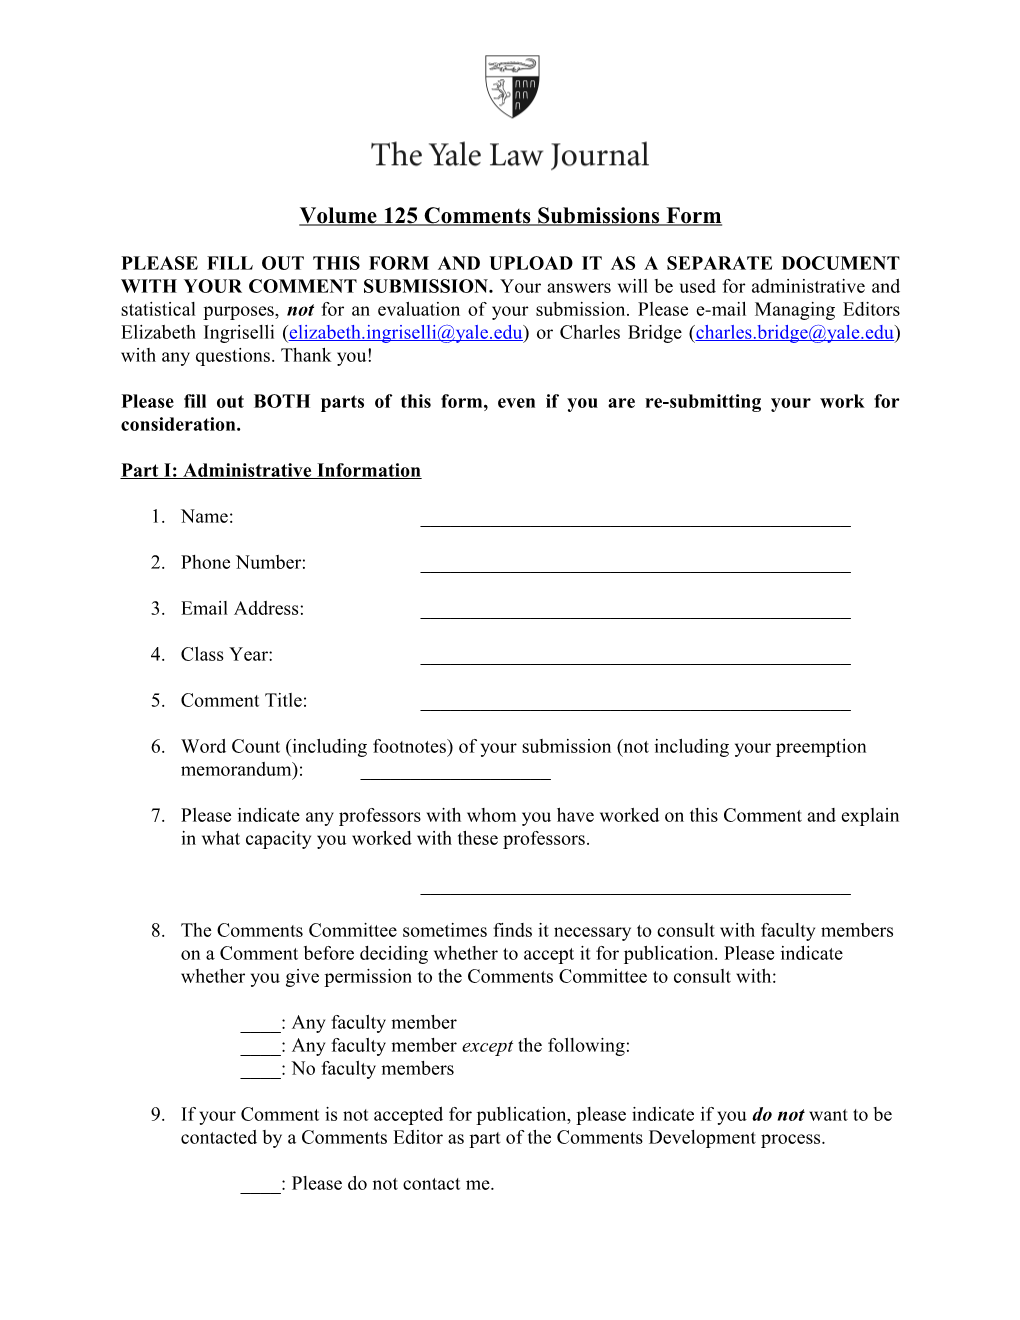 Please Fill out BOTH Parts of This Form, Even If You Are Re-Submitting Your Work For